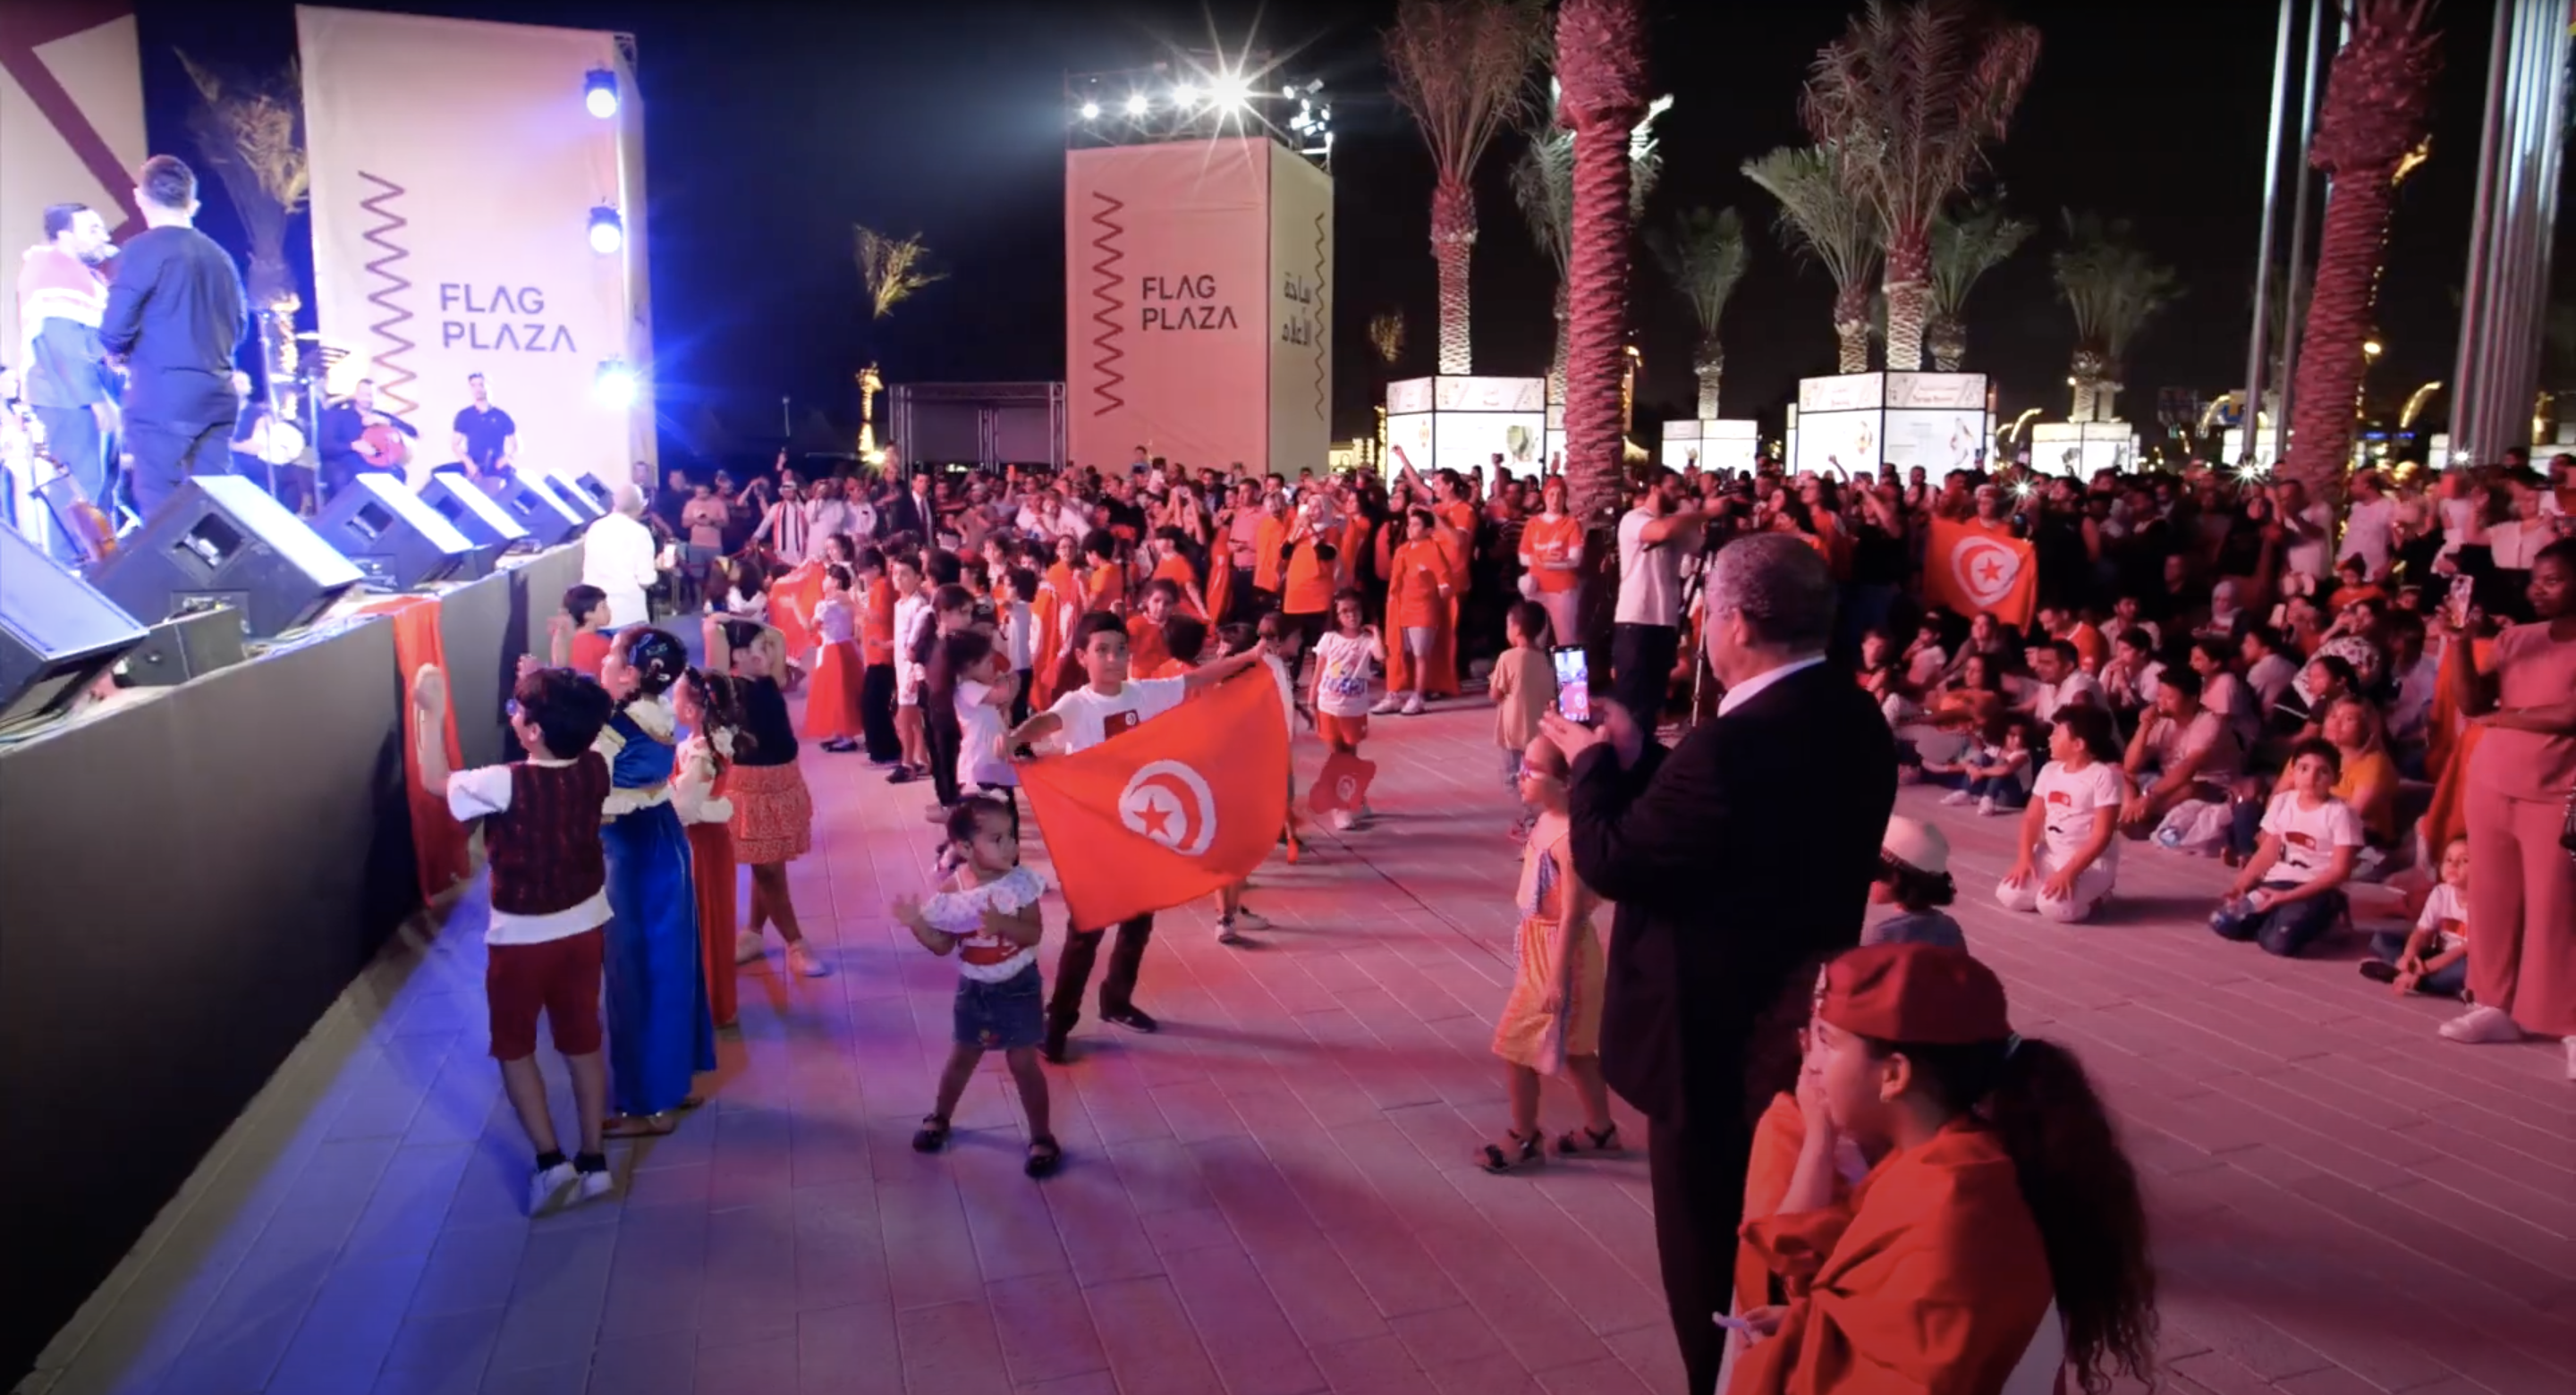 A crowd watch a performance on an outdoor stage at Flag Plaza in Doha, Qatar during the Community Festival 2022.